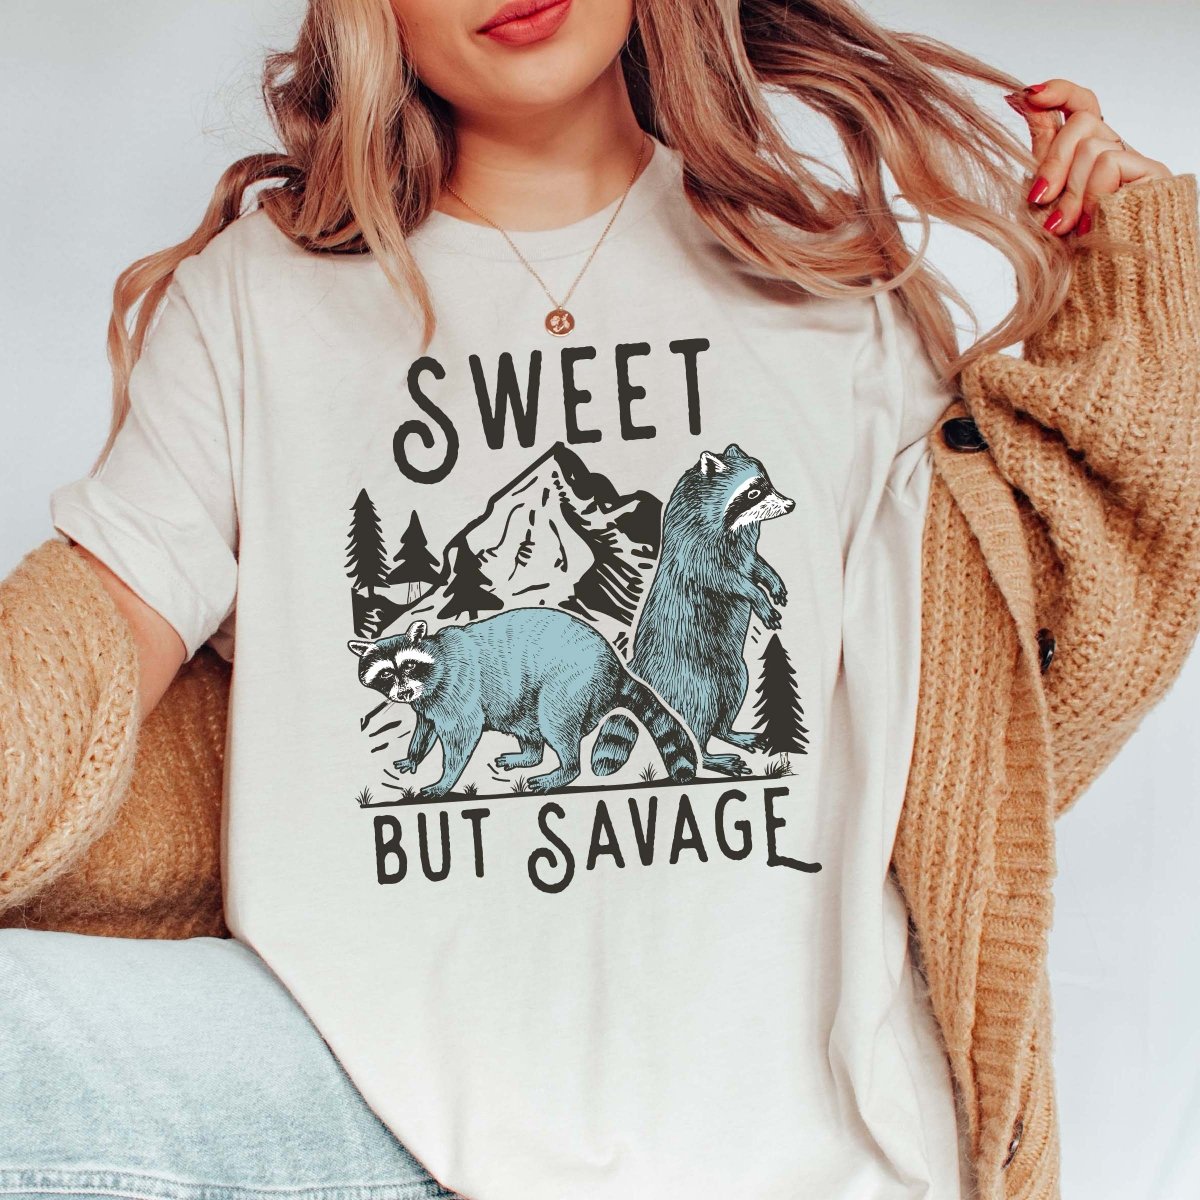 Sweet but savage Tee - Limeberry Designs